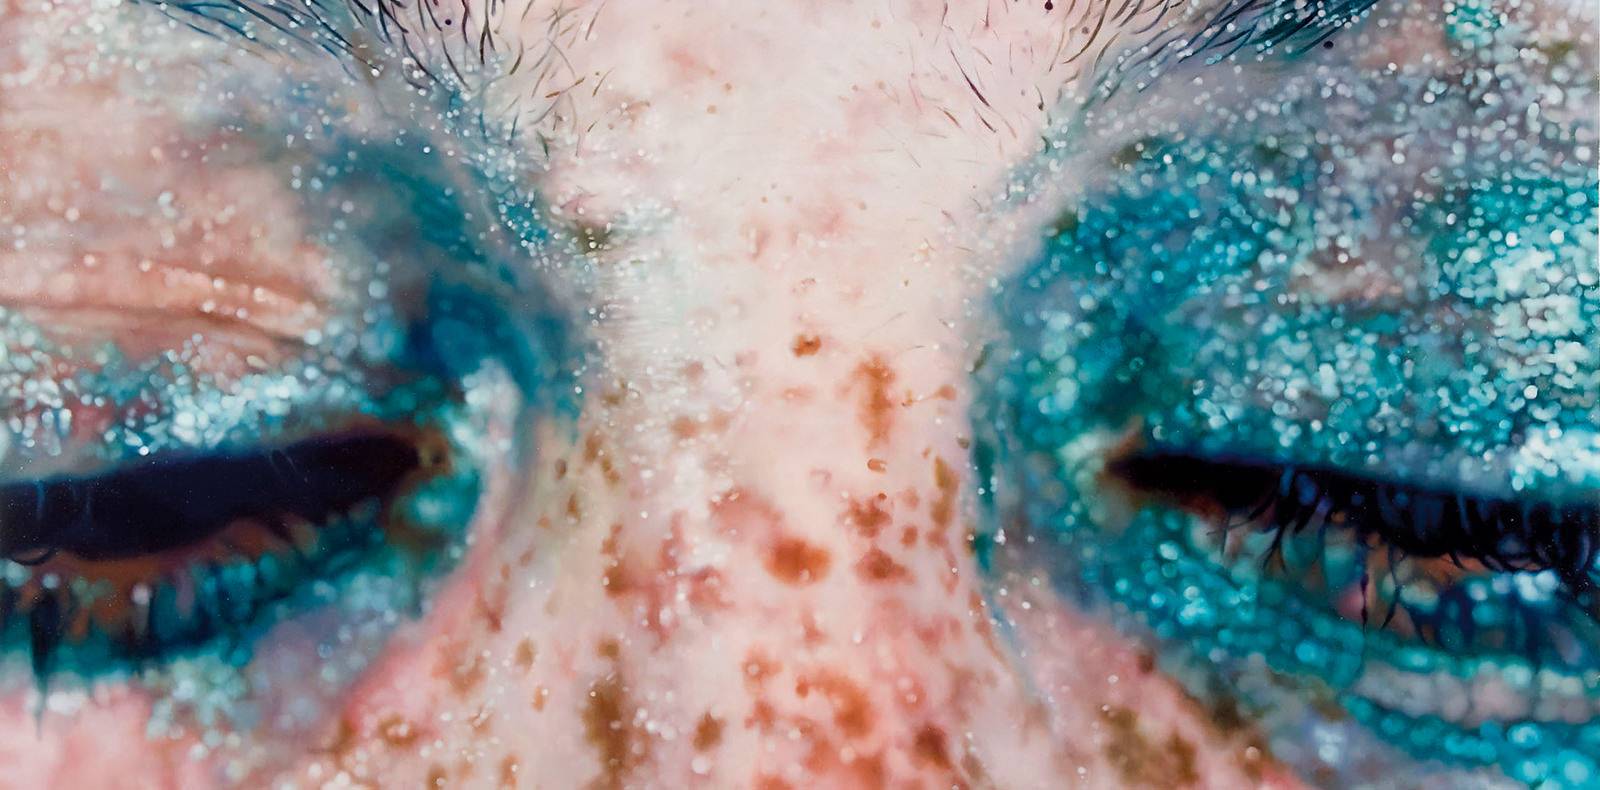 The pop sensuality of Marilyn Minter